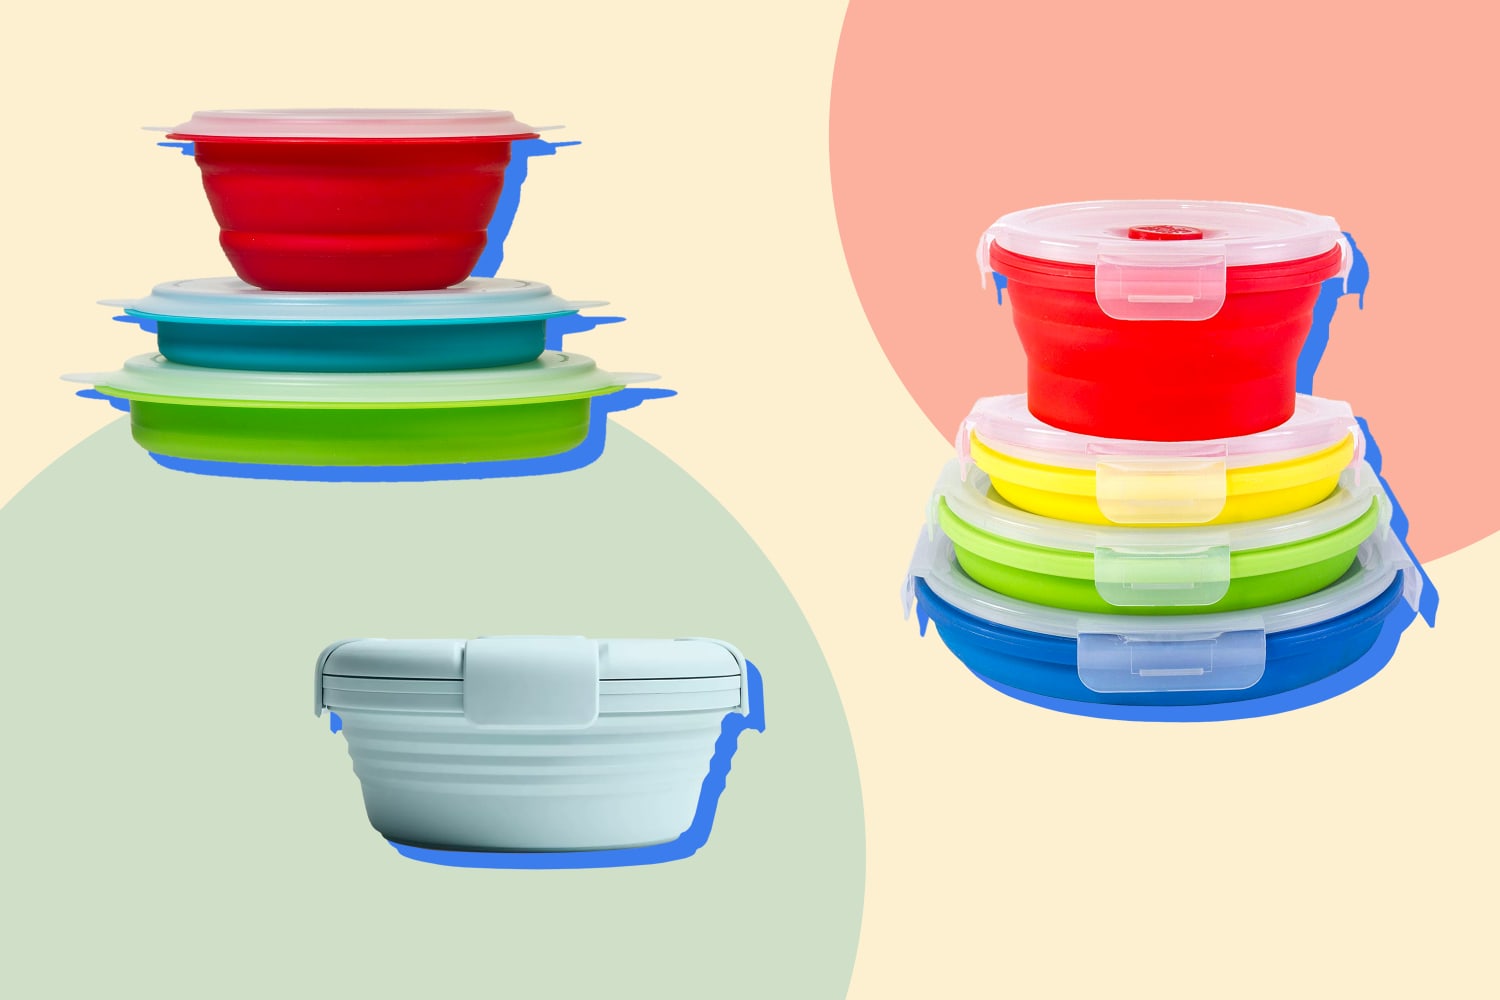 collapsible food storage container set - silicon tupperware food storage  set, 705353068768